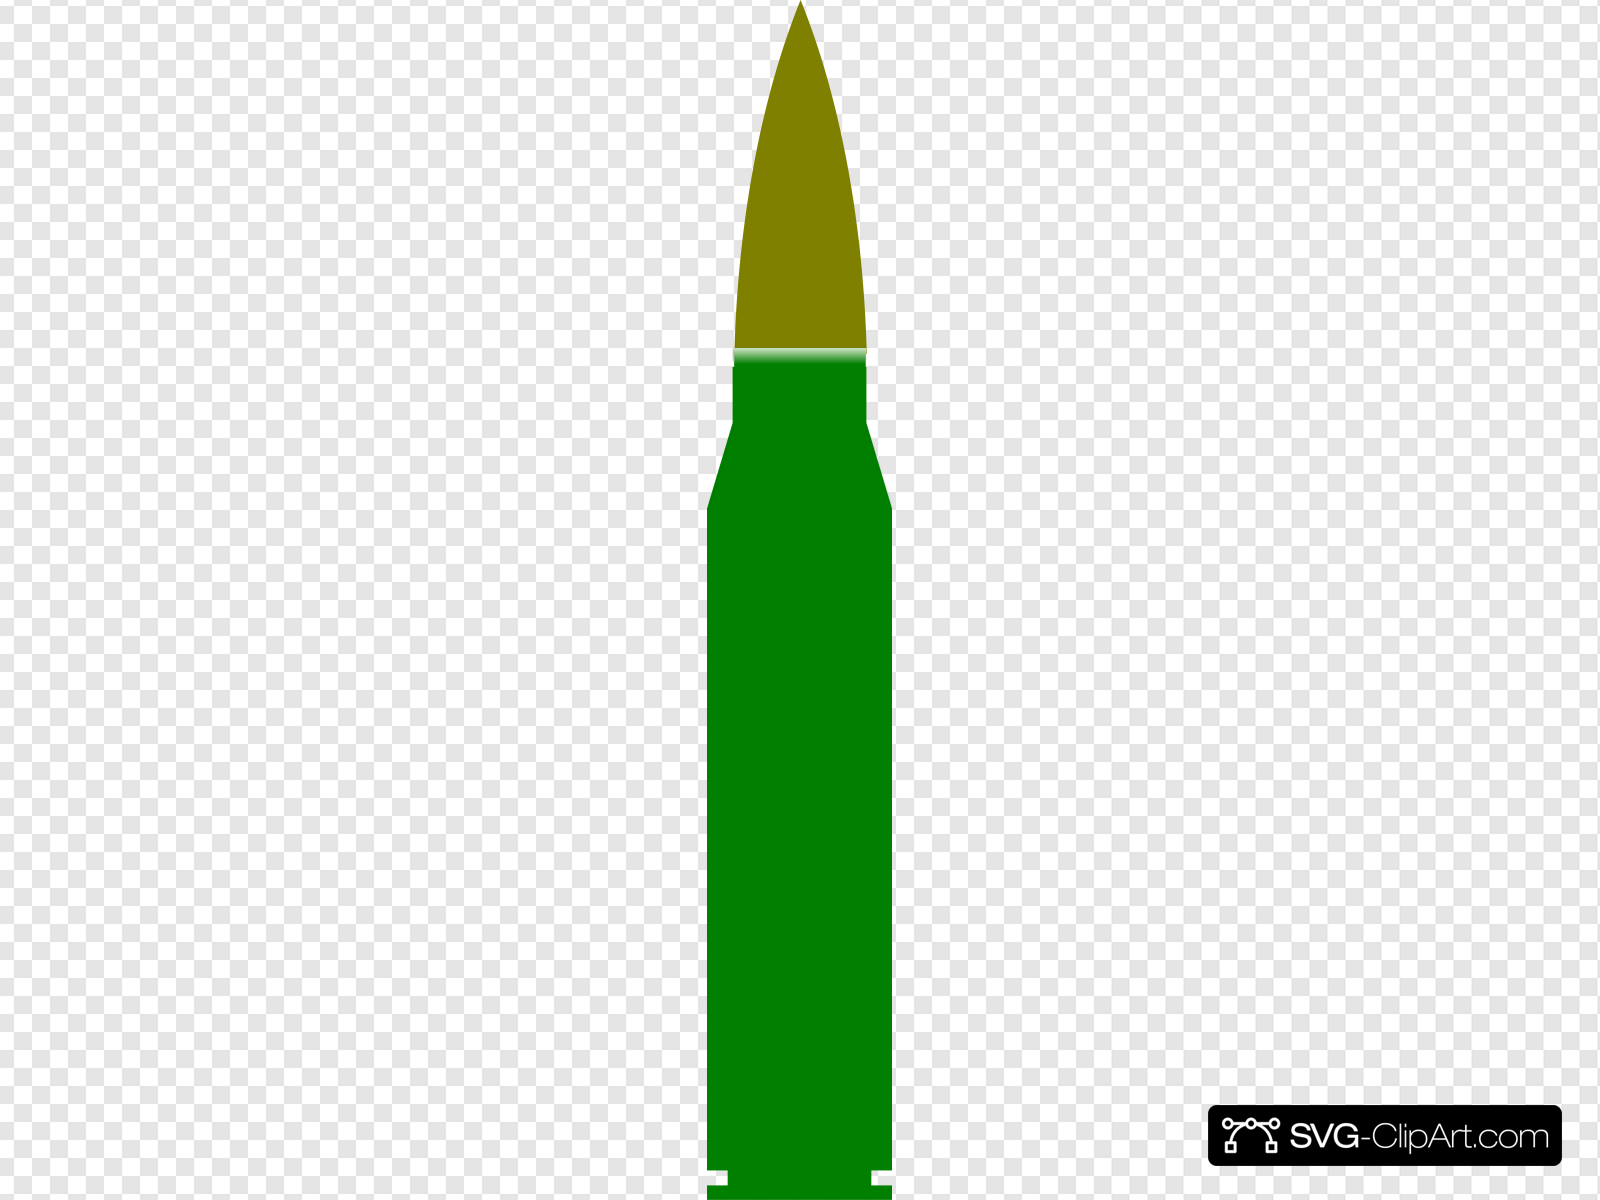 Green Bullet Clip art, Icon and SVG.